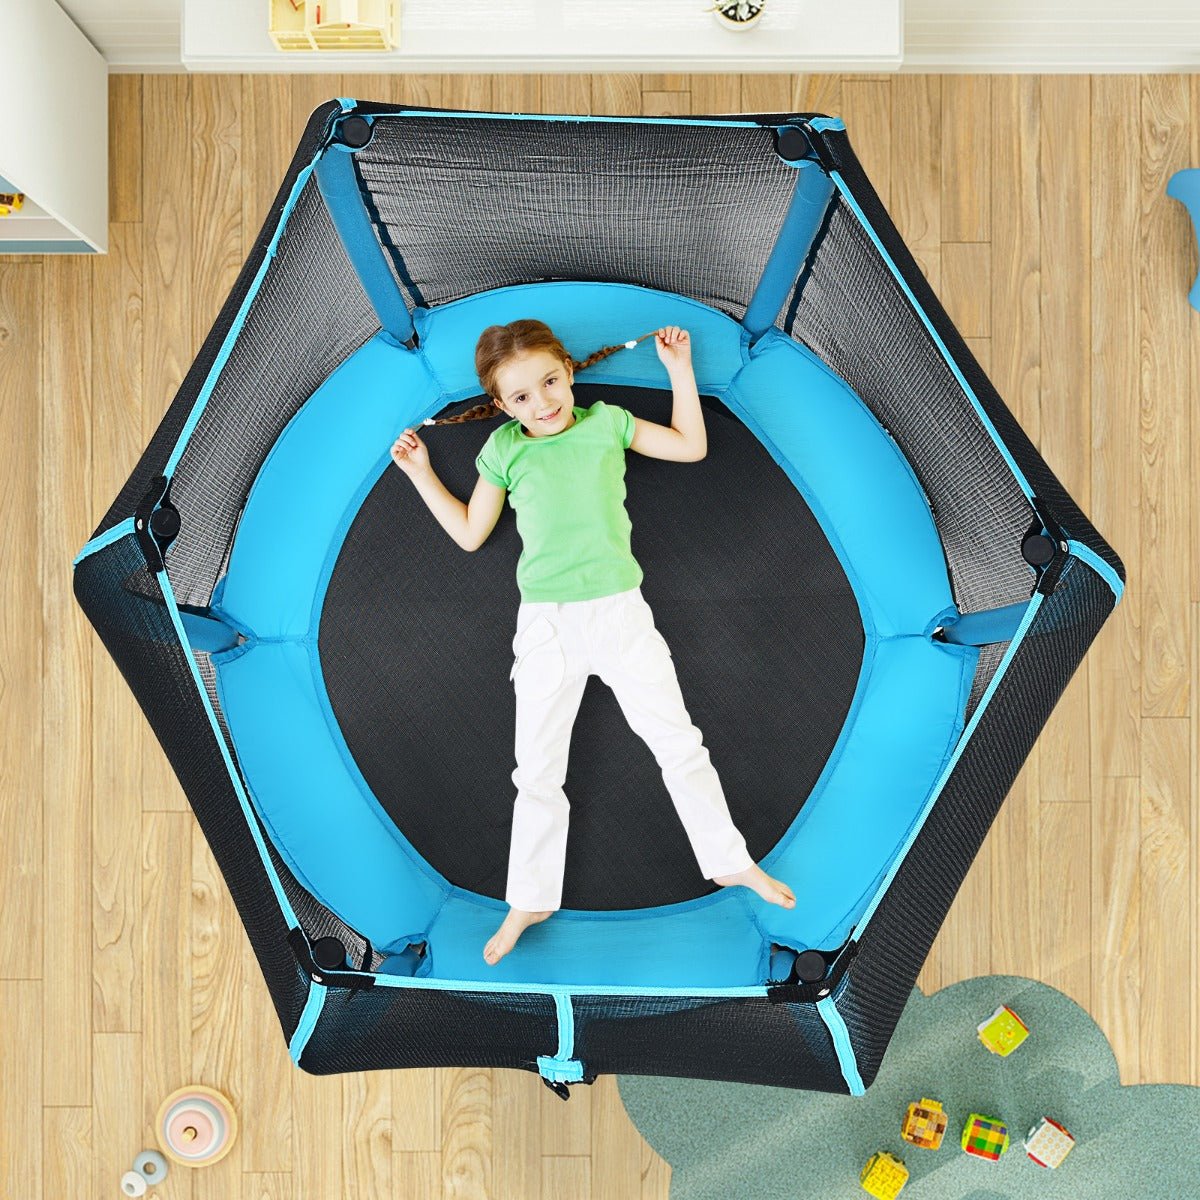 Jump into Joy: 42 Inches Trampoline with Enclosure Net and Safety Pad